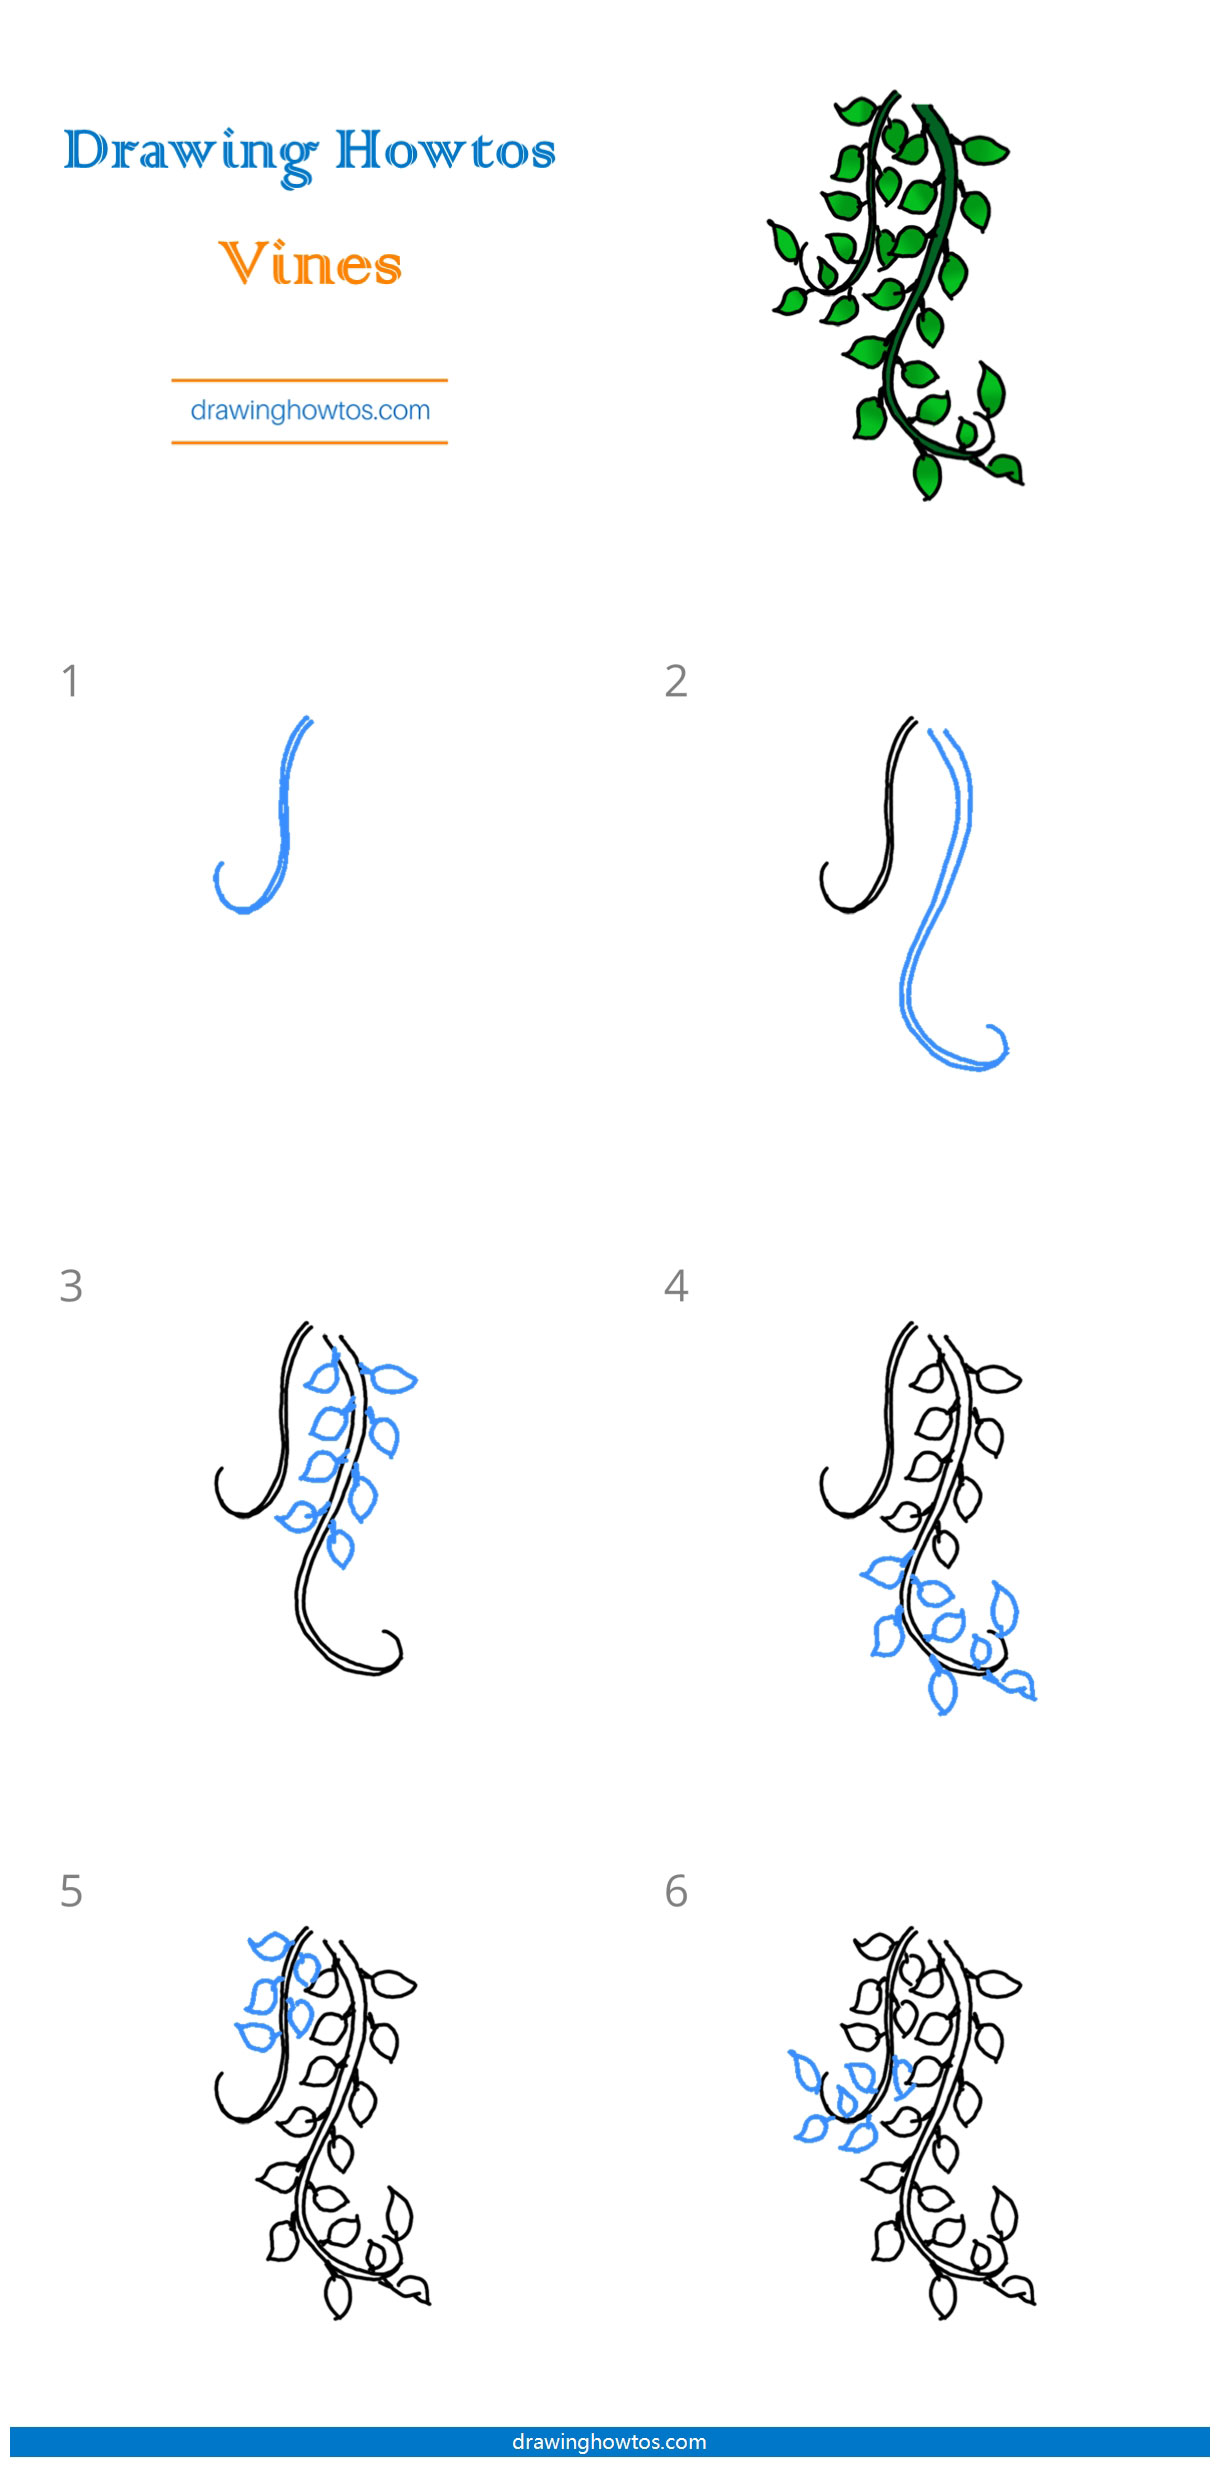 How to Draw Vines Step by Step